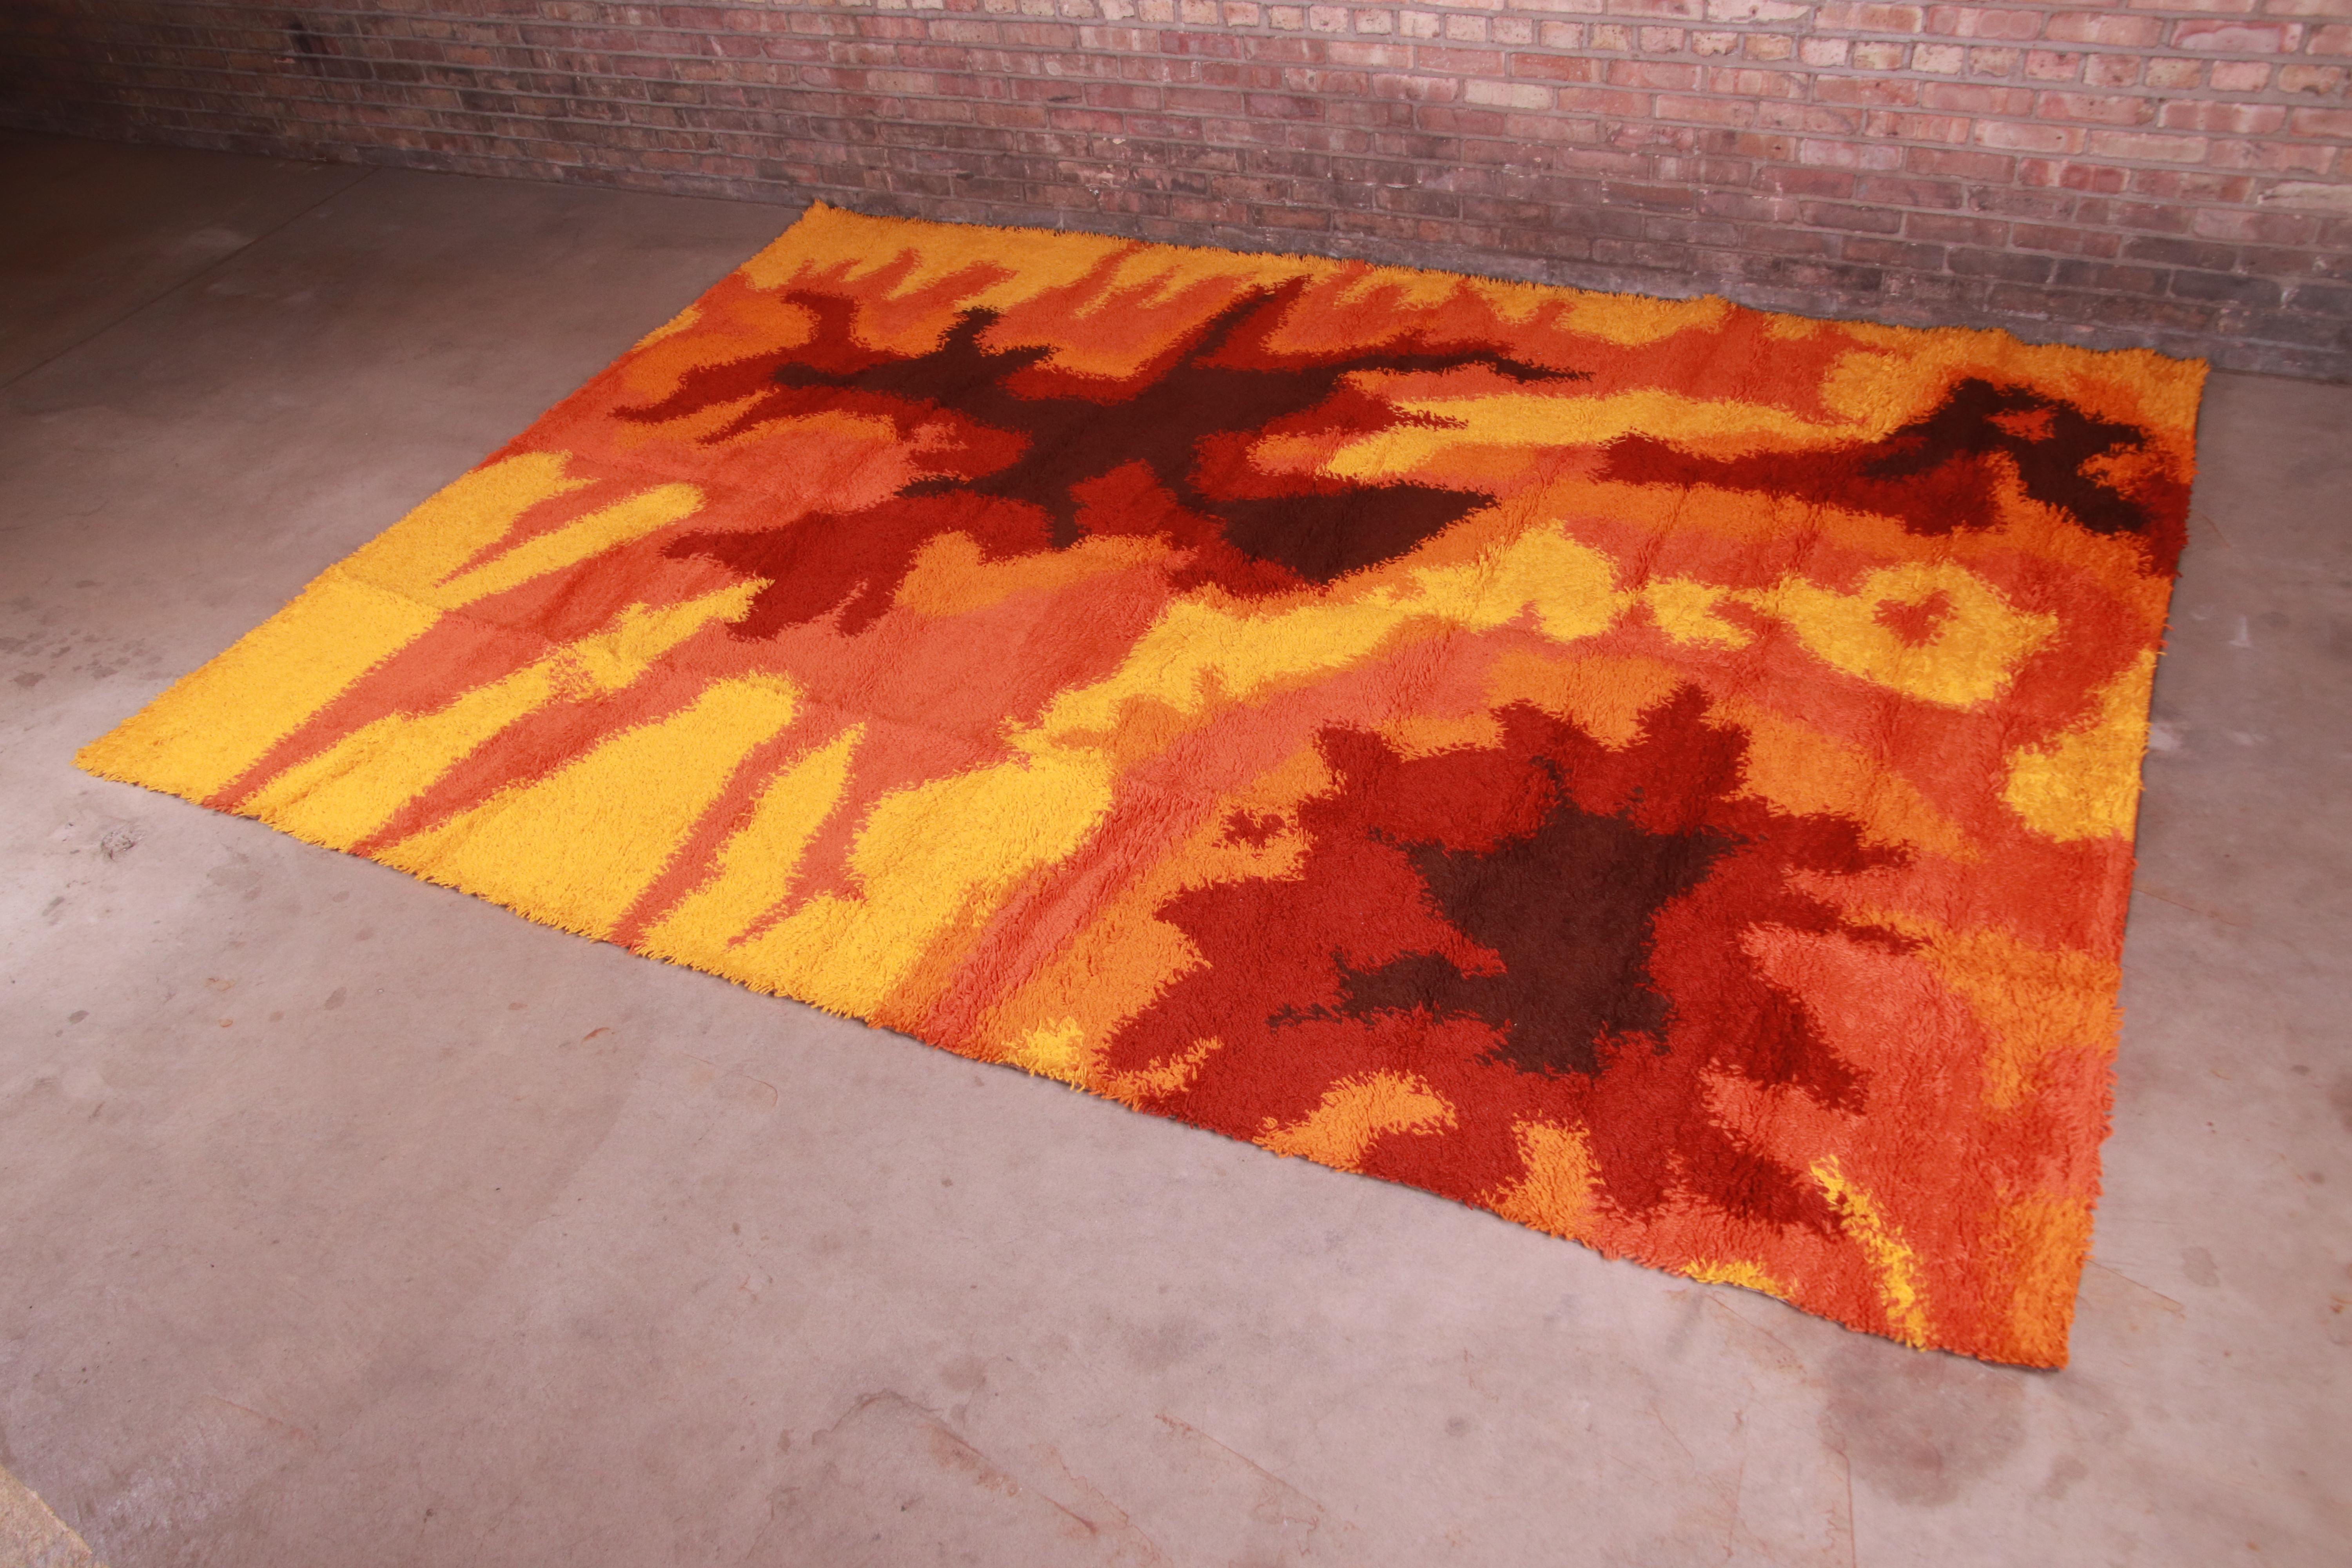 70s style rug